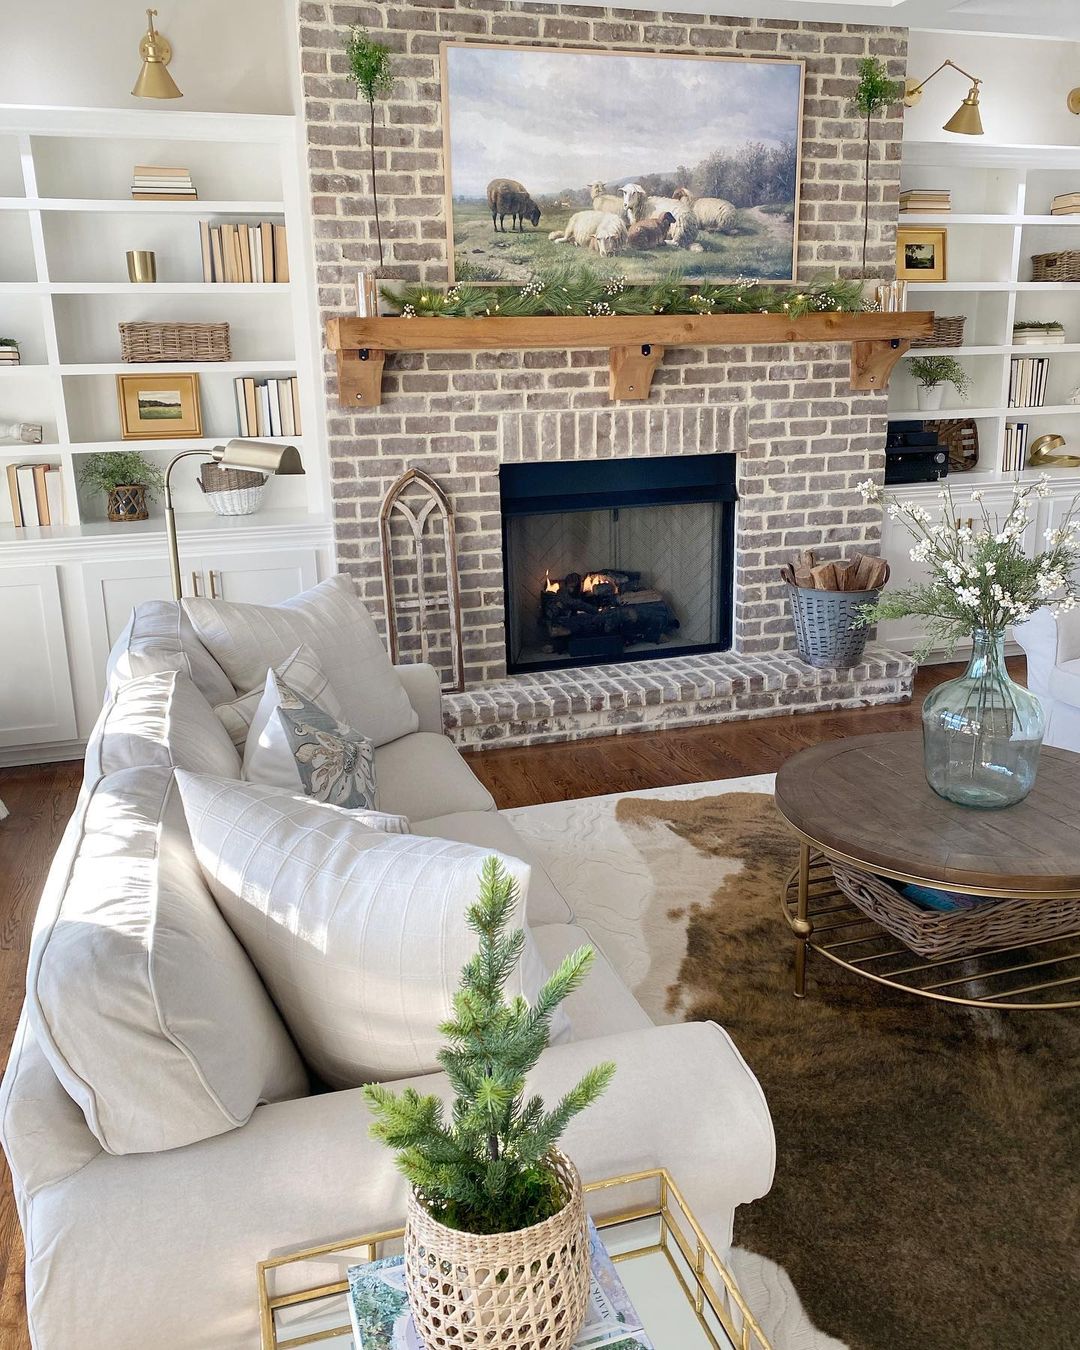 Elegant Farmhouse Style: Brick Fireplace with Integrated Shelving